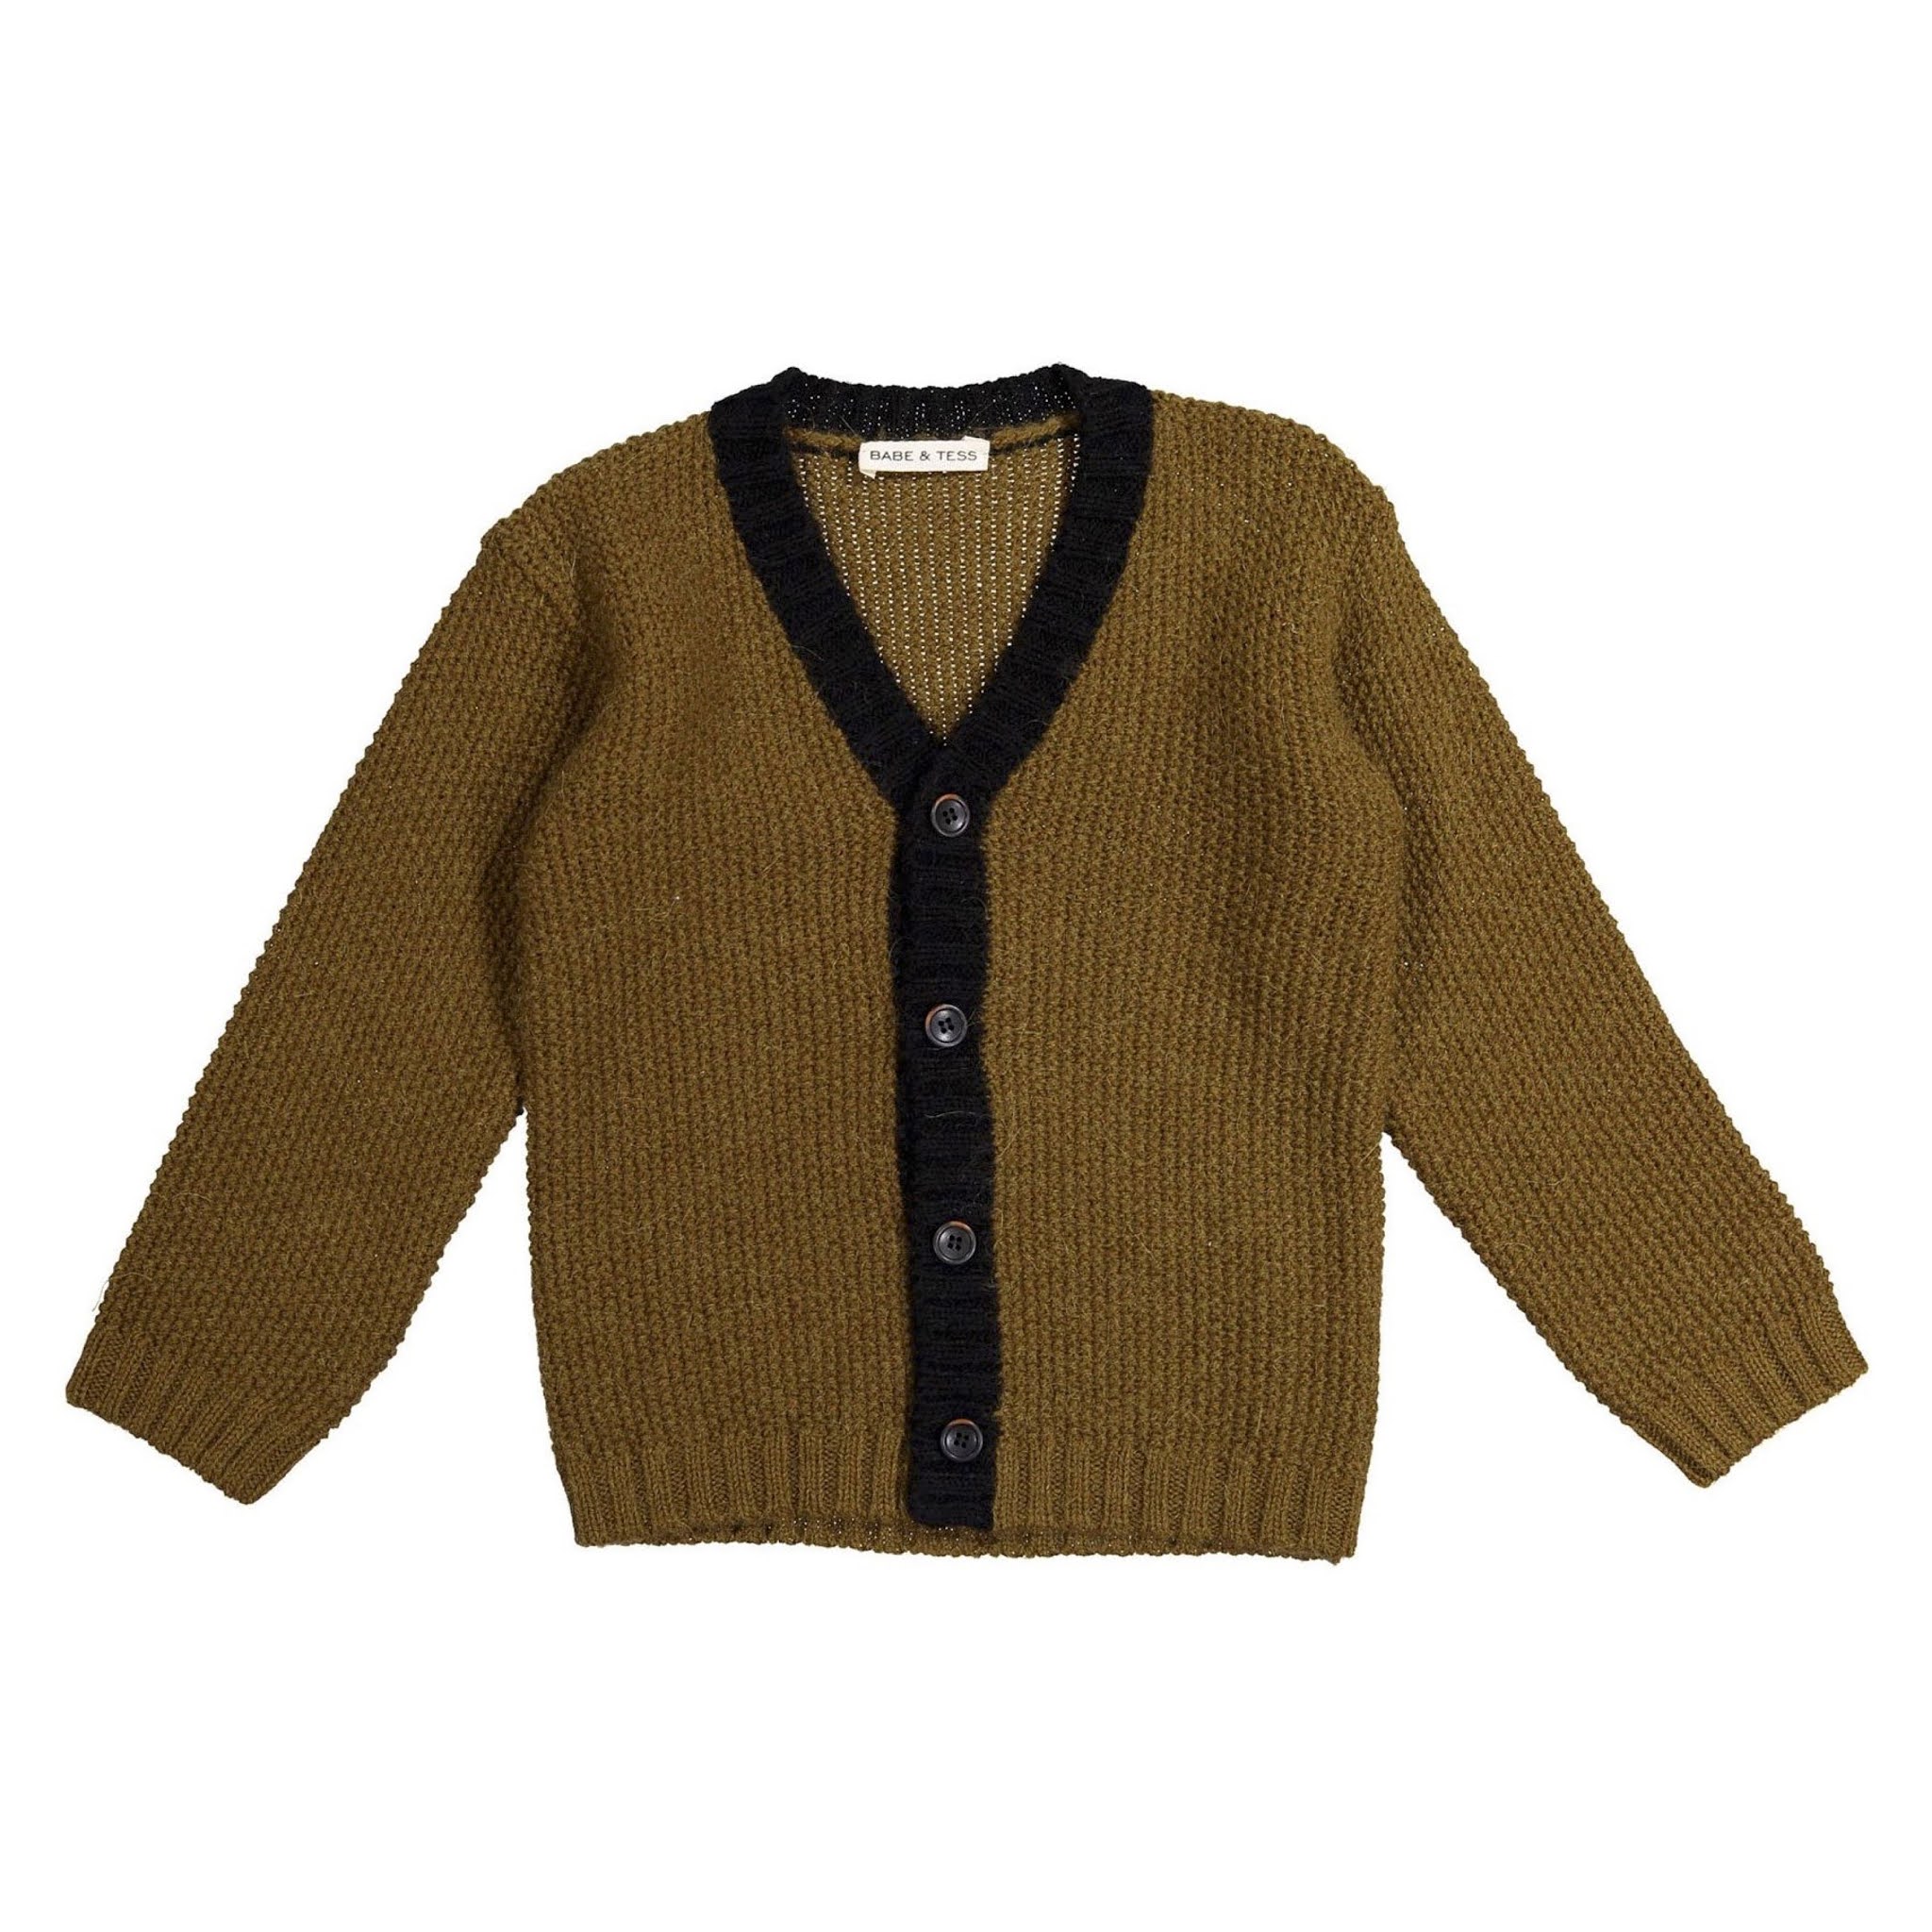 Kids Moss and Black Trim Cardigan from Babe and Tess